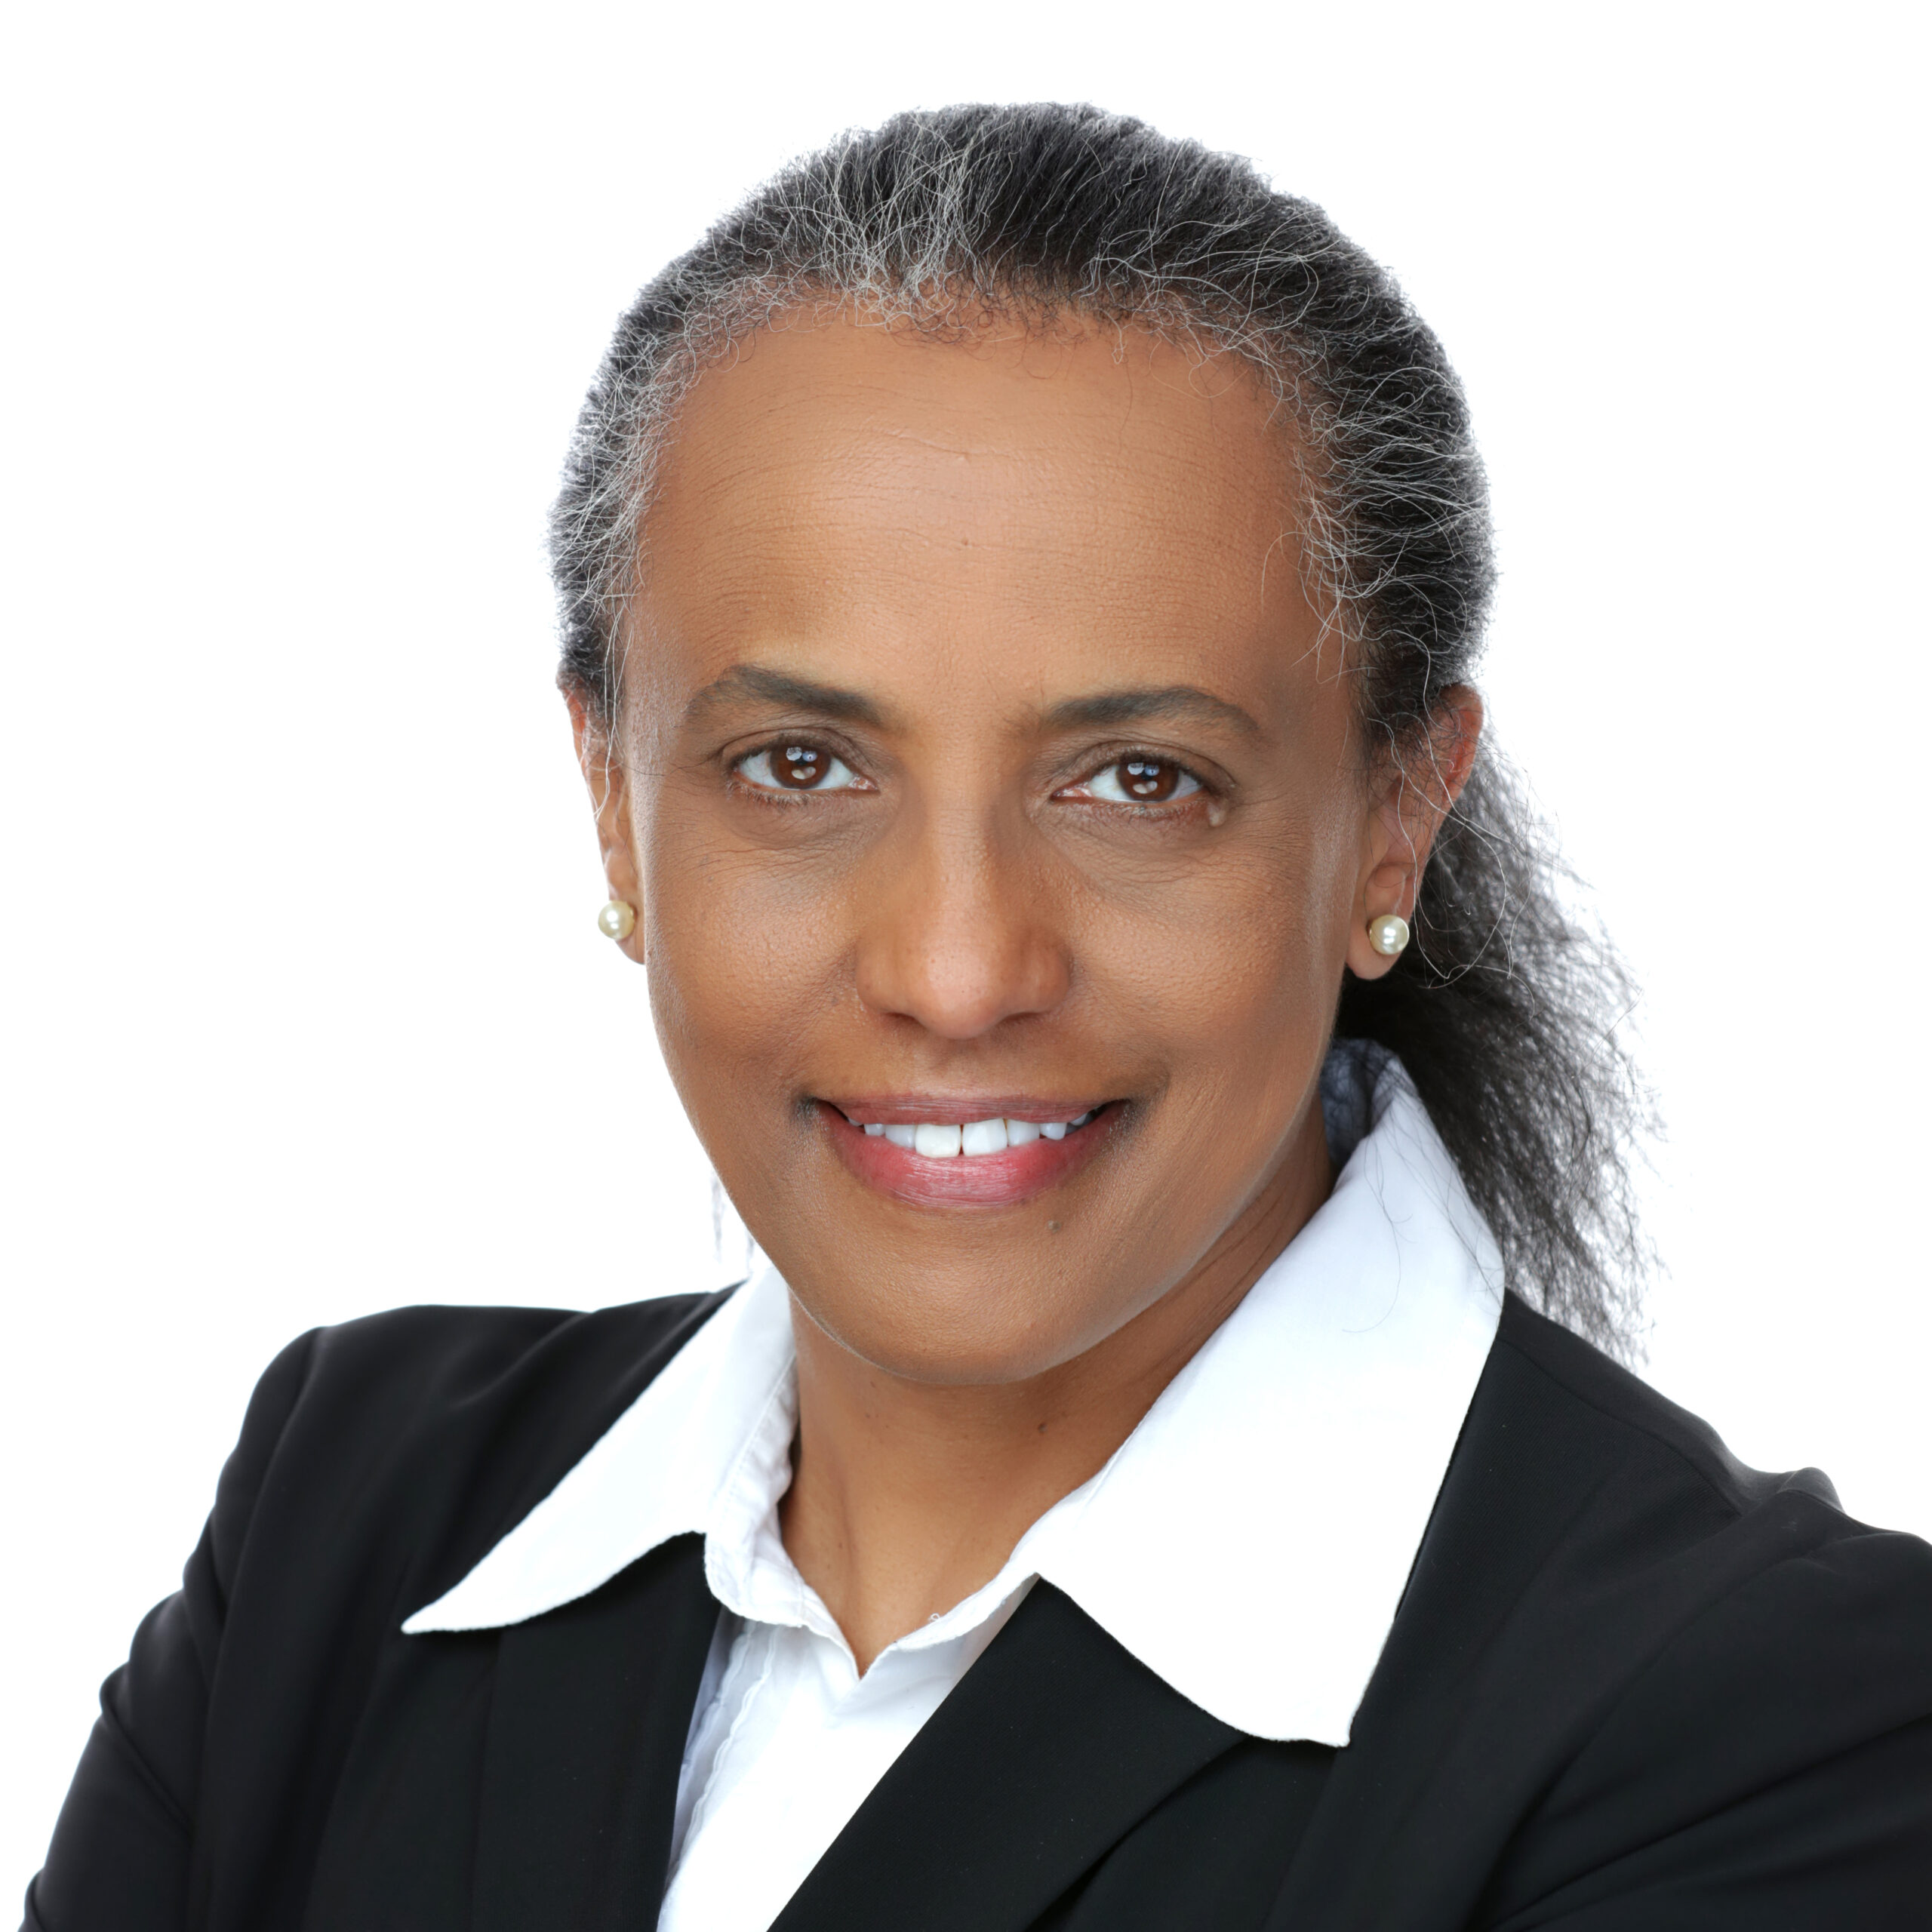 Professional Headshot on white background for a woman